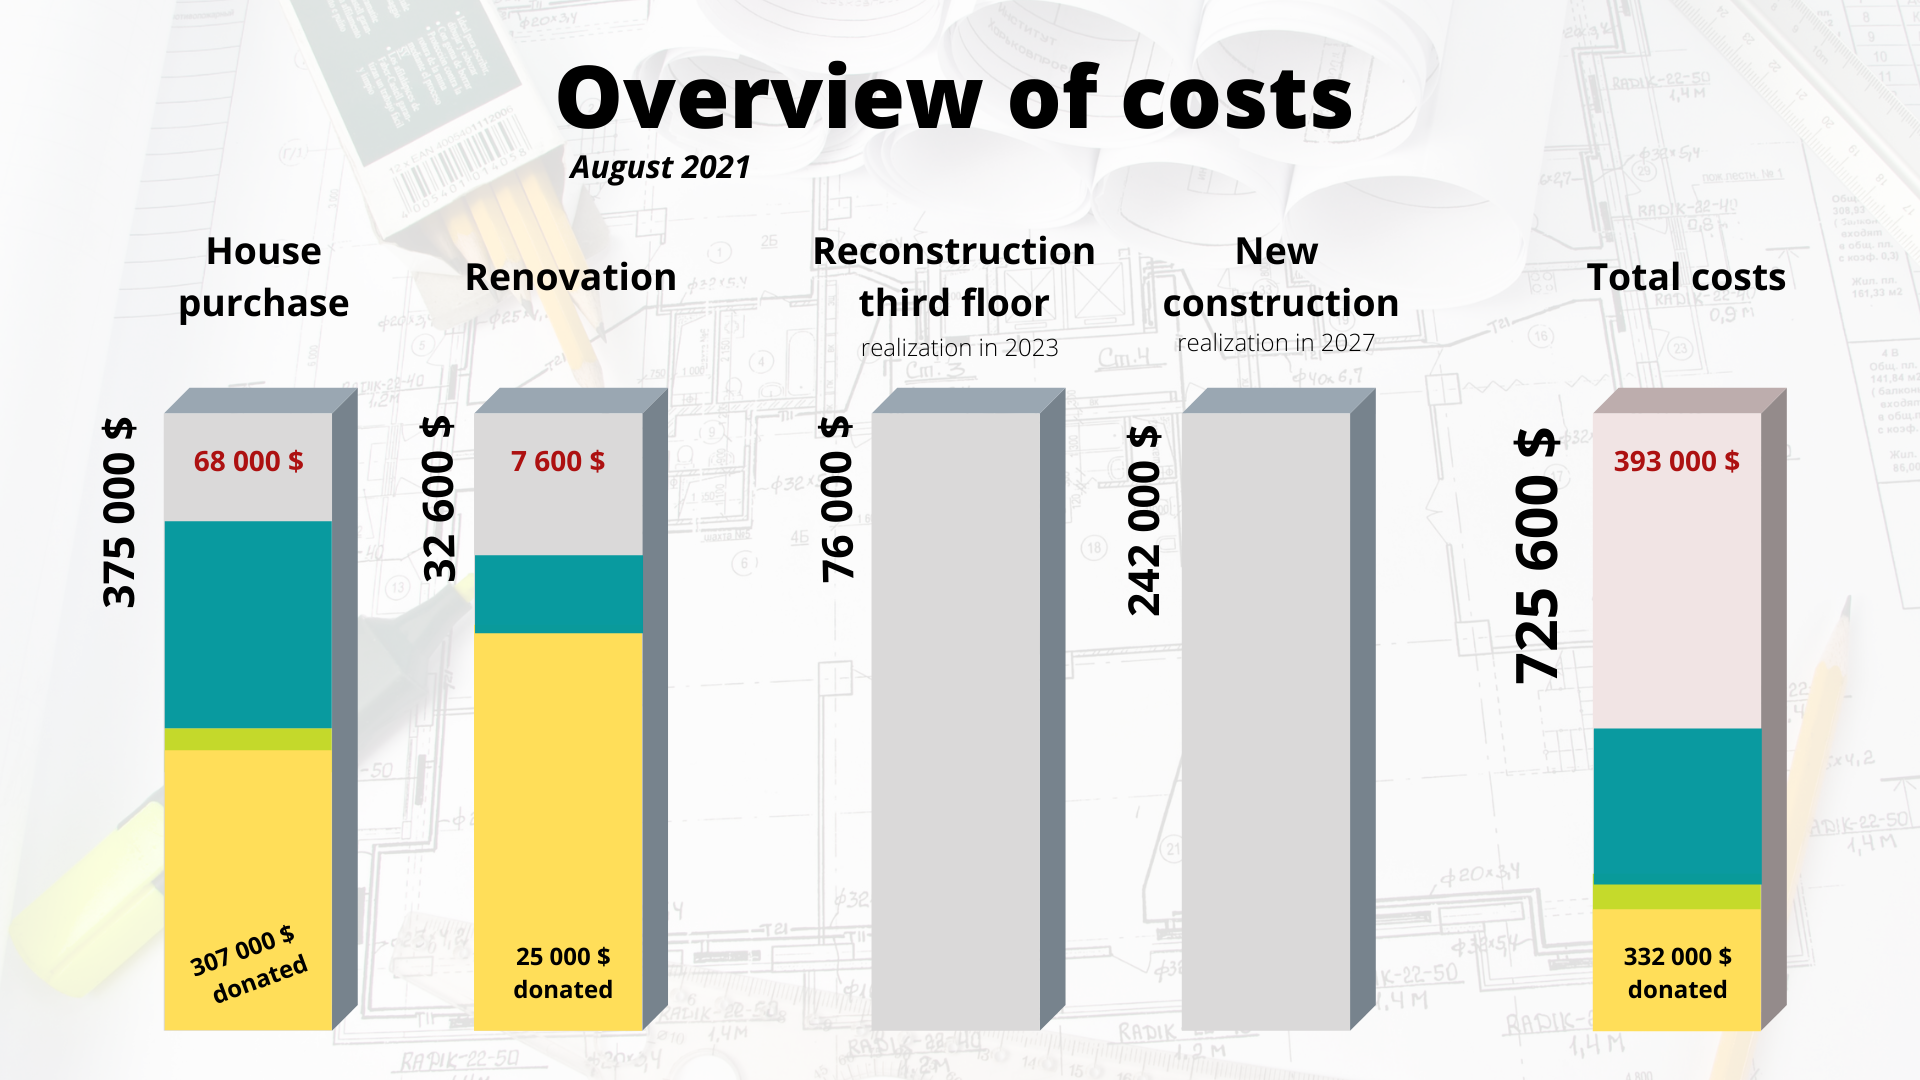 Overview of costs